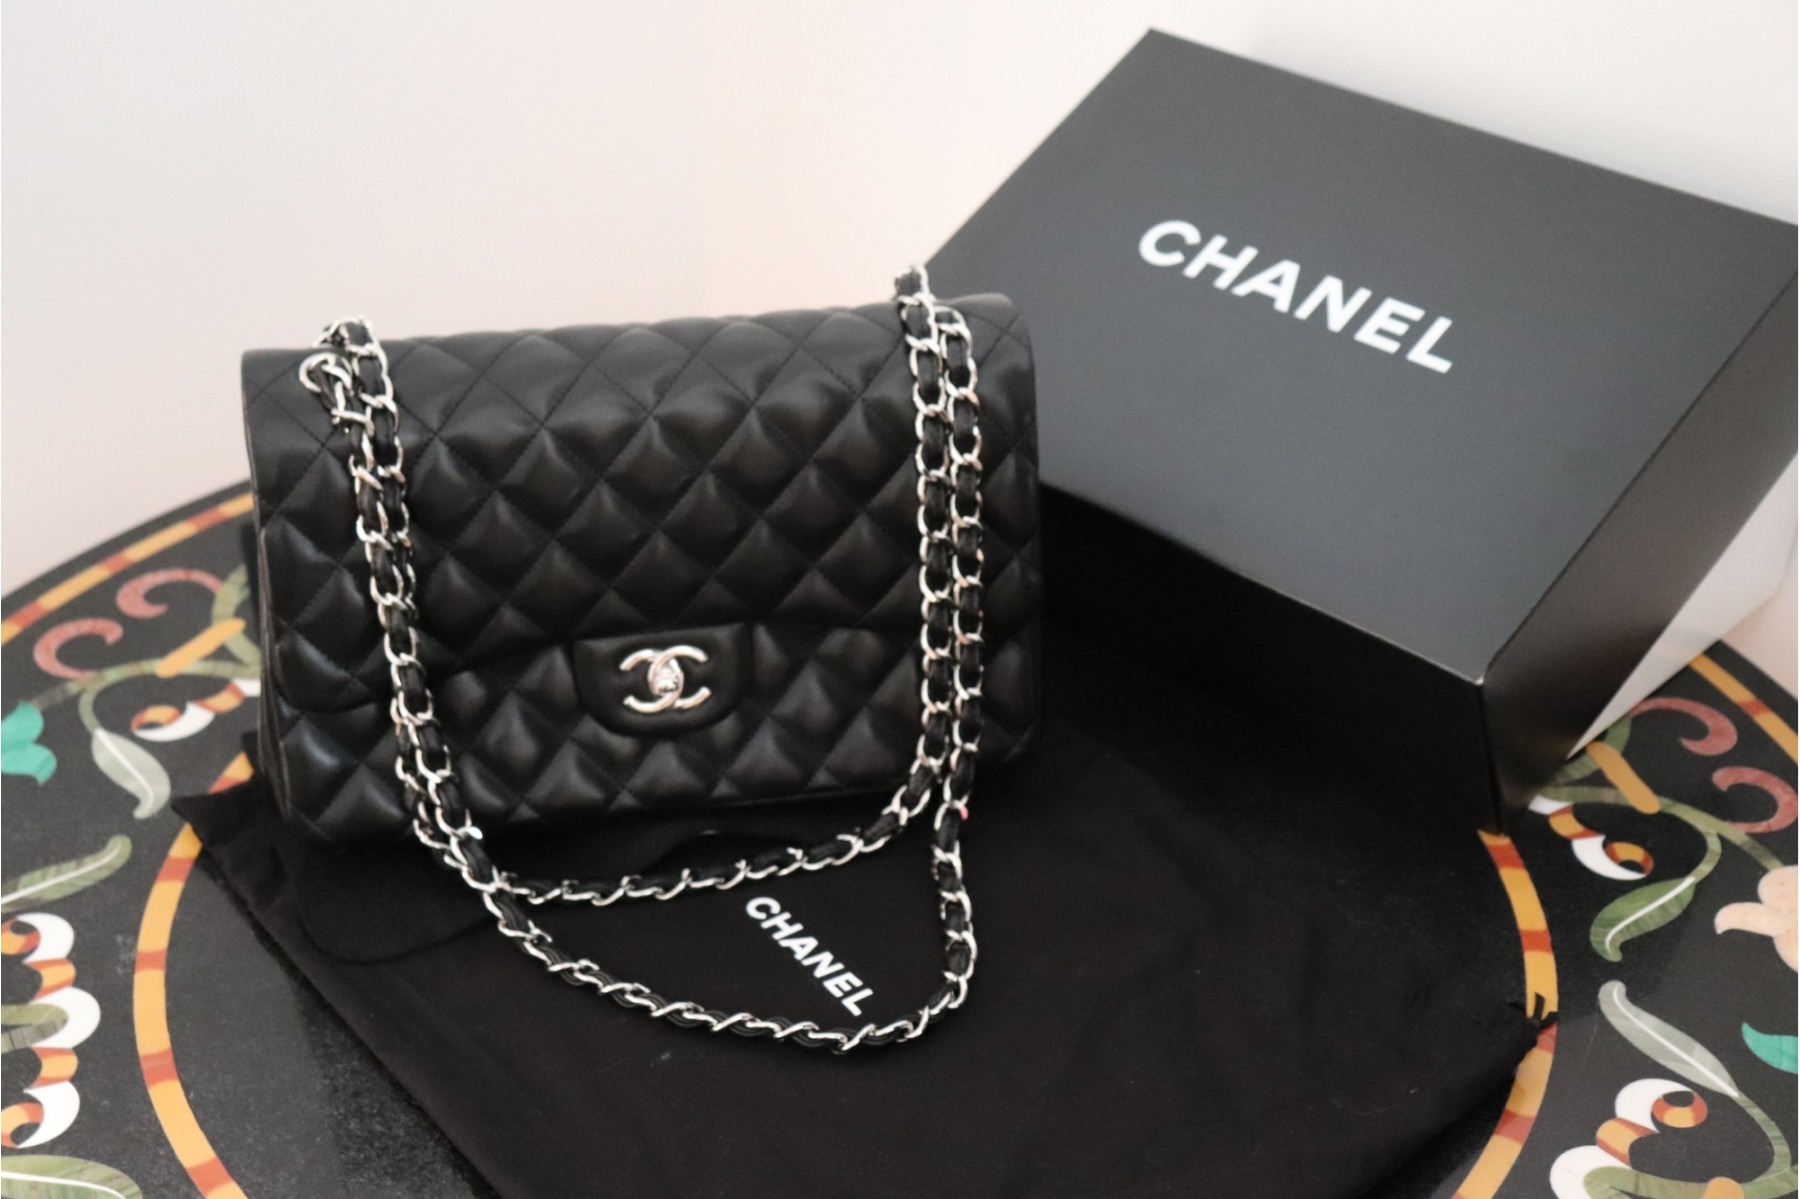 Fabulous Chanel 11 3/4 L Classic Black Calf Leather Handbag In Like New  Condition! Used 2x's #6320